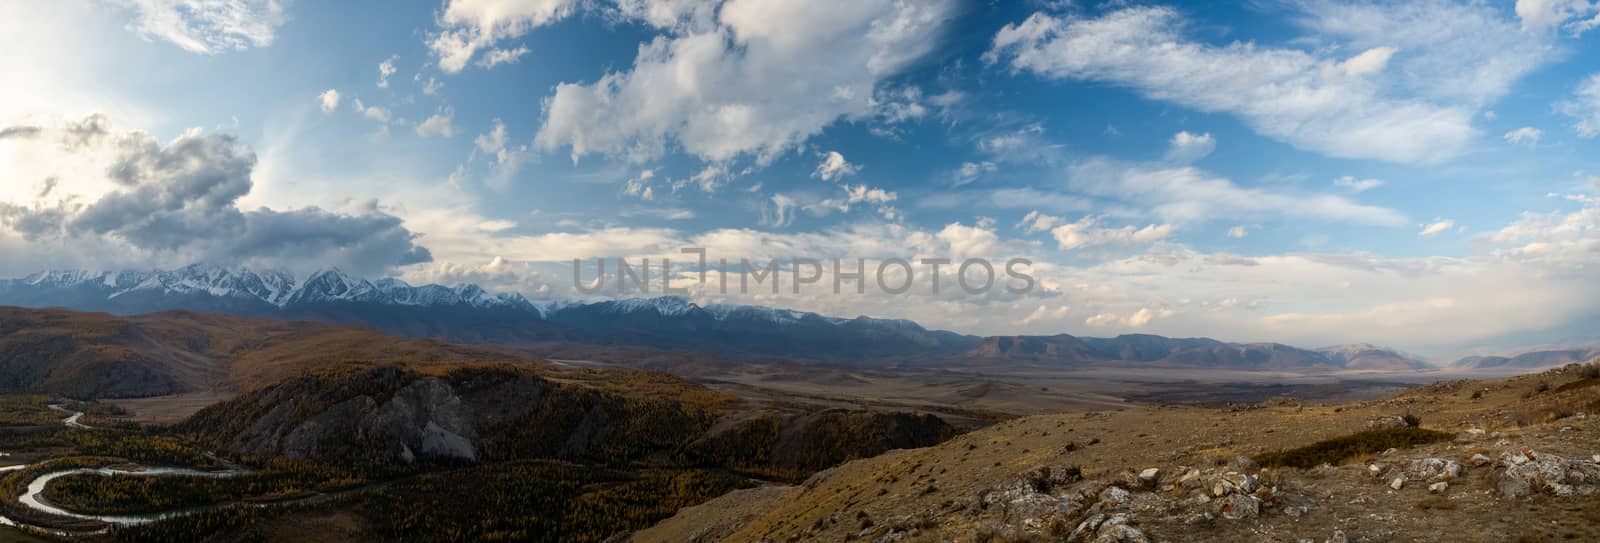 Panorama is Altai, a mountain river flowing between the Altai mountains and the nature of the area. by DePo